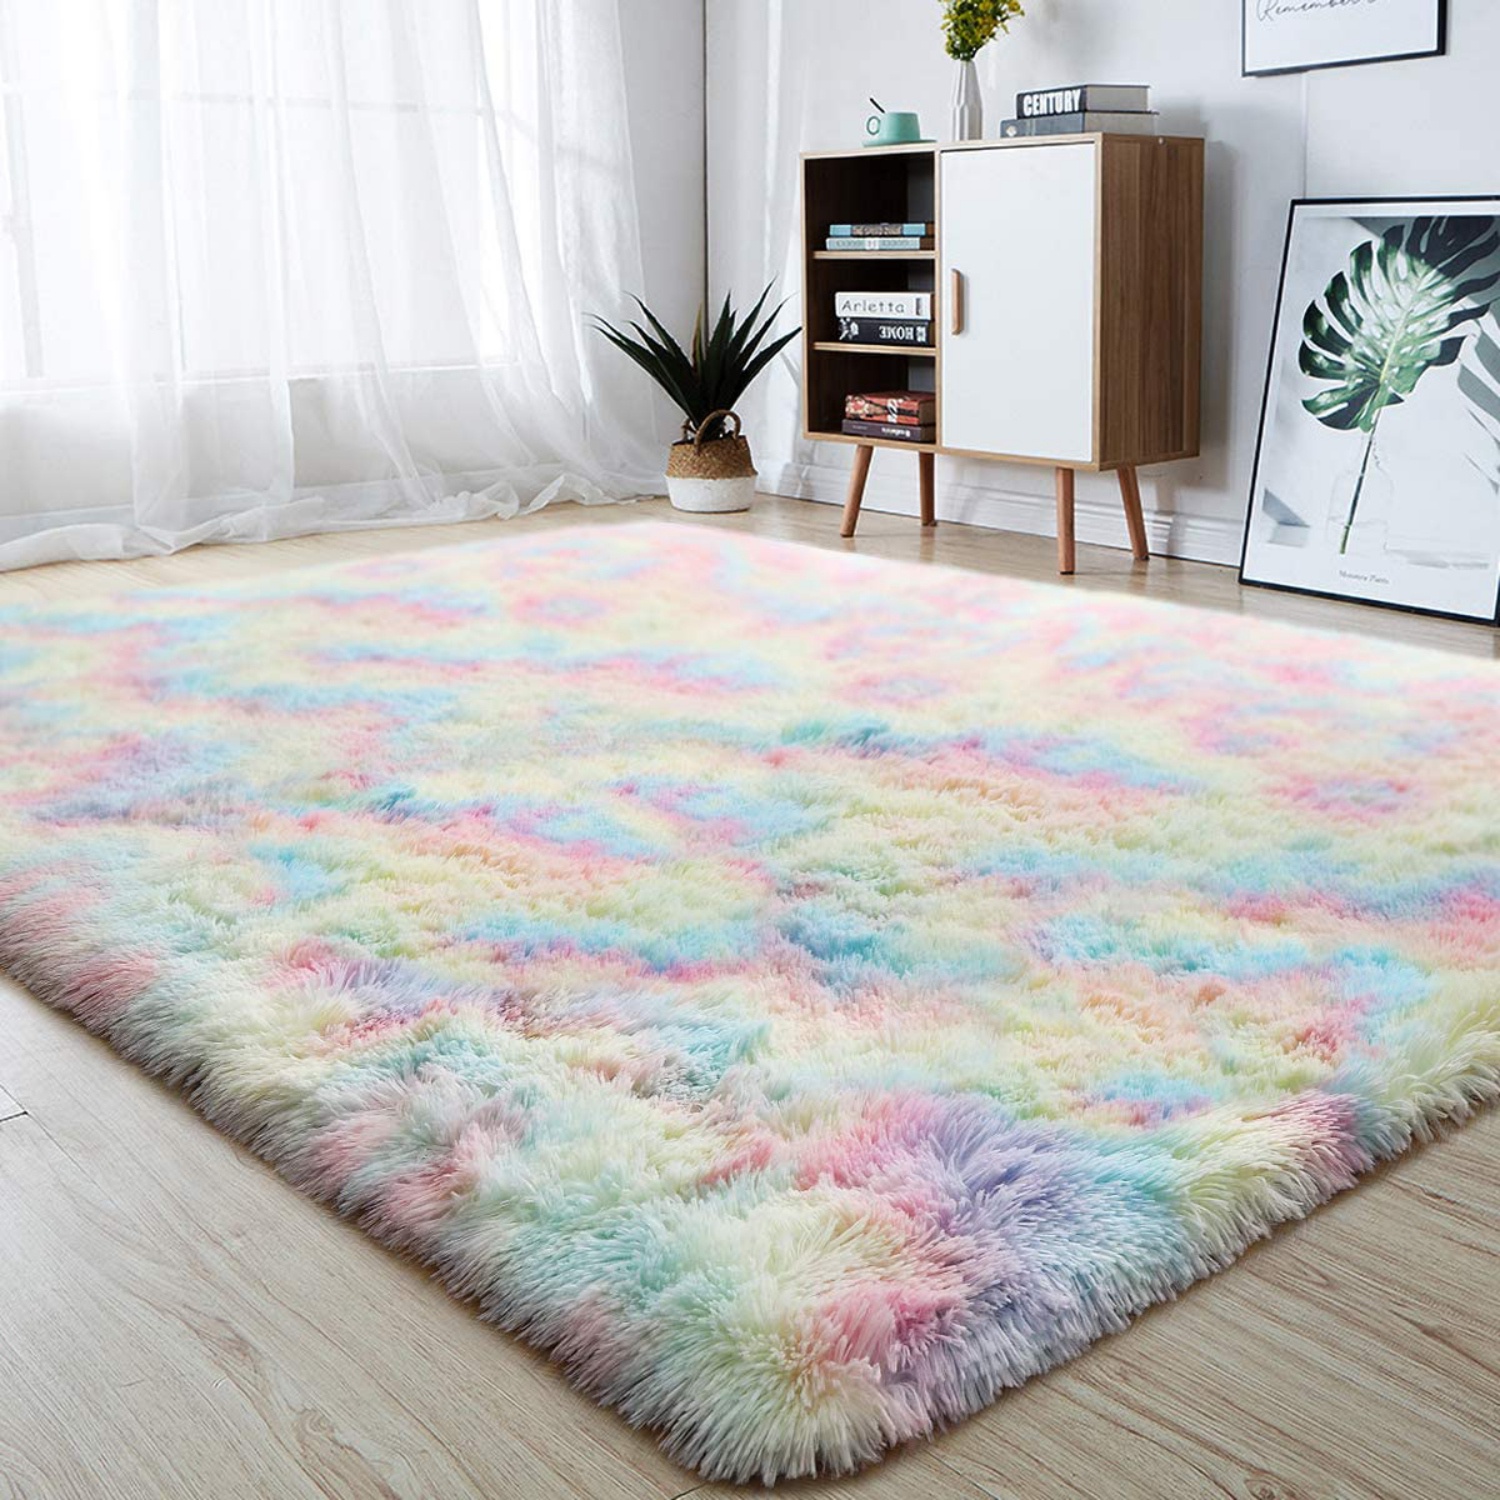 Rainbow Area Rug for Kids Play Room Warm Soft Luxury Rug Plush Throw Rugs High Pile Rug Handmade Knitted Nursery Decoration Rugs Baby Care Crawling Carpet, 3ft x 5ft - image 1 of 7